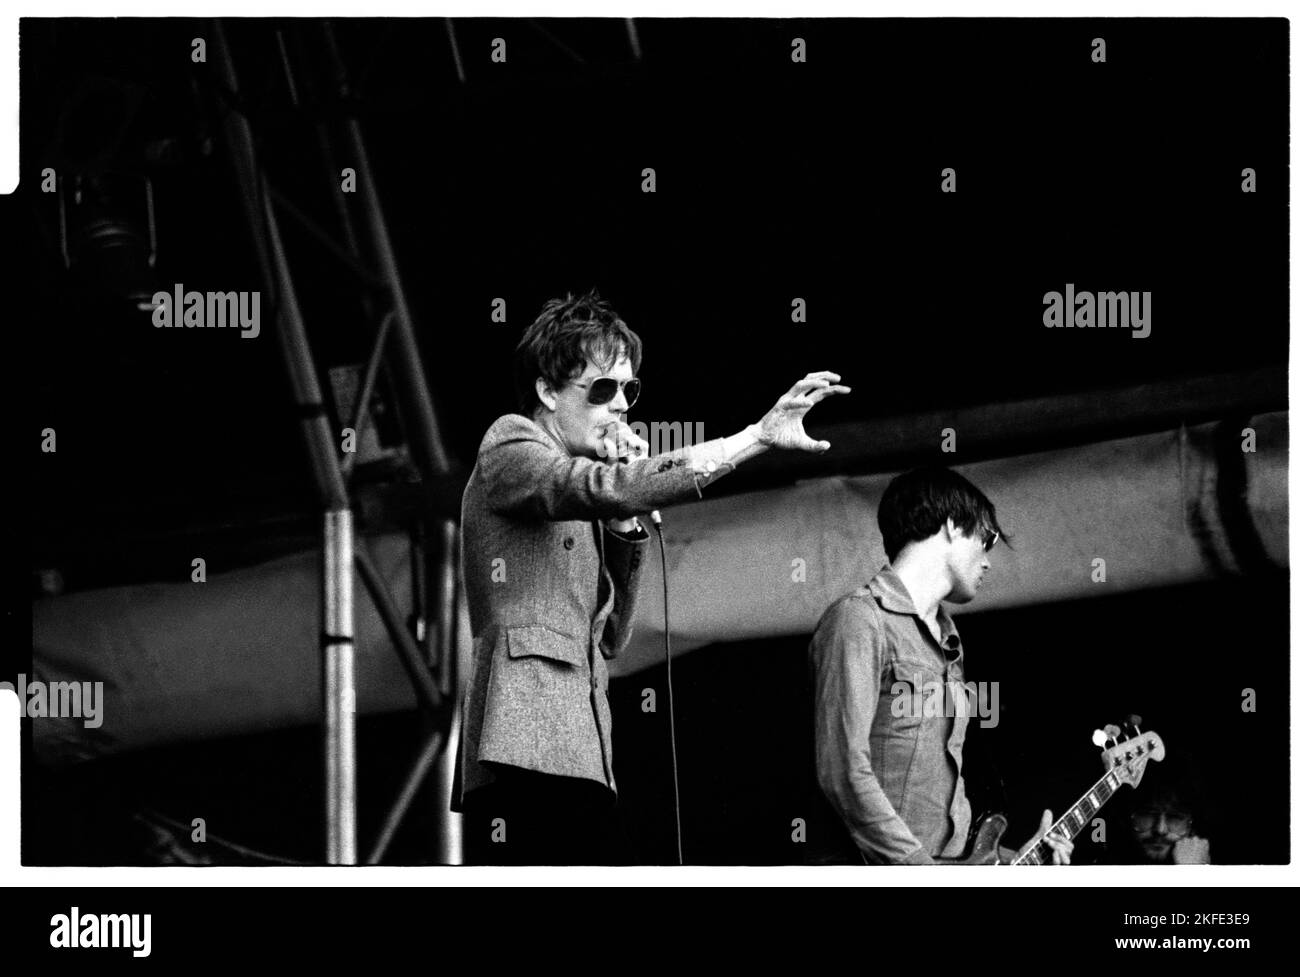 Jarvis Cocker Singer And Steve Mackey Bass Of British Pop Group Pulp Playing The Nme Stage At